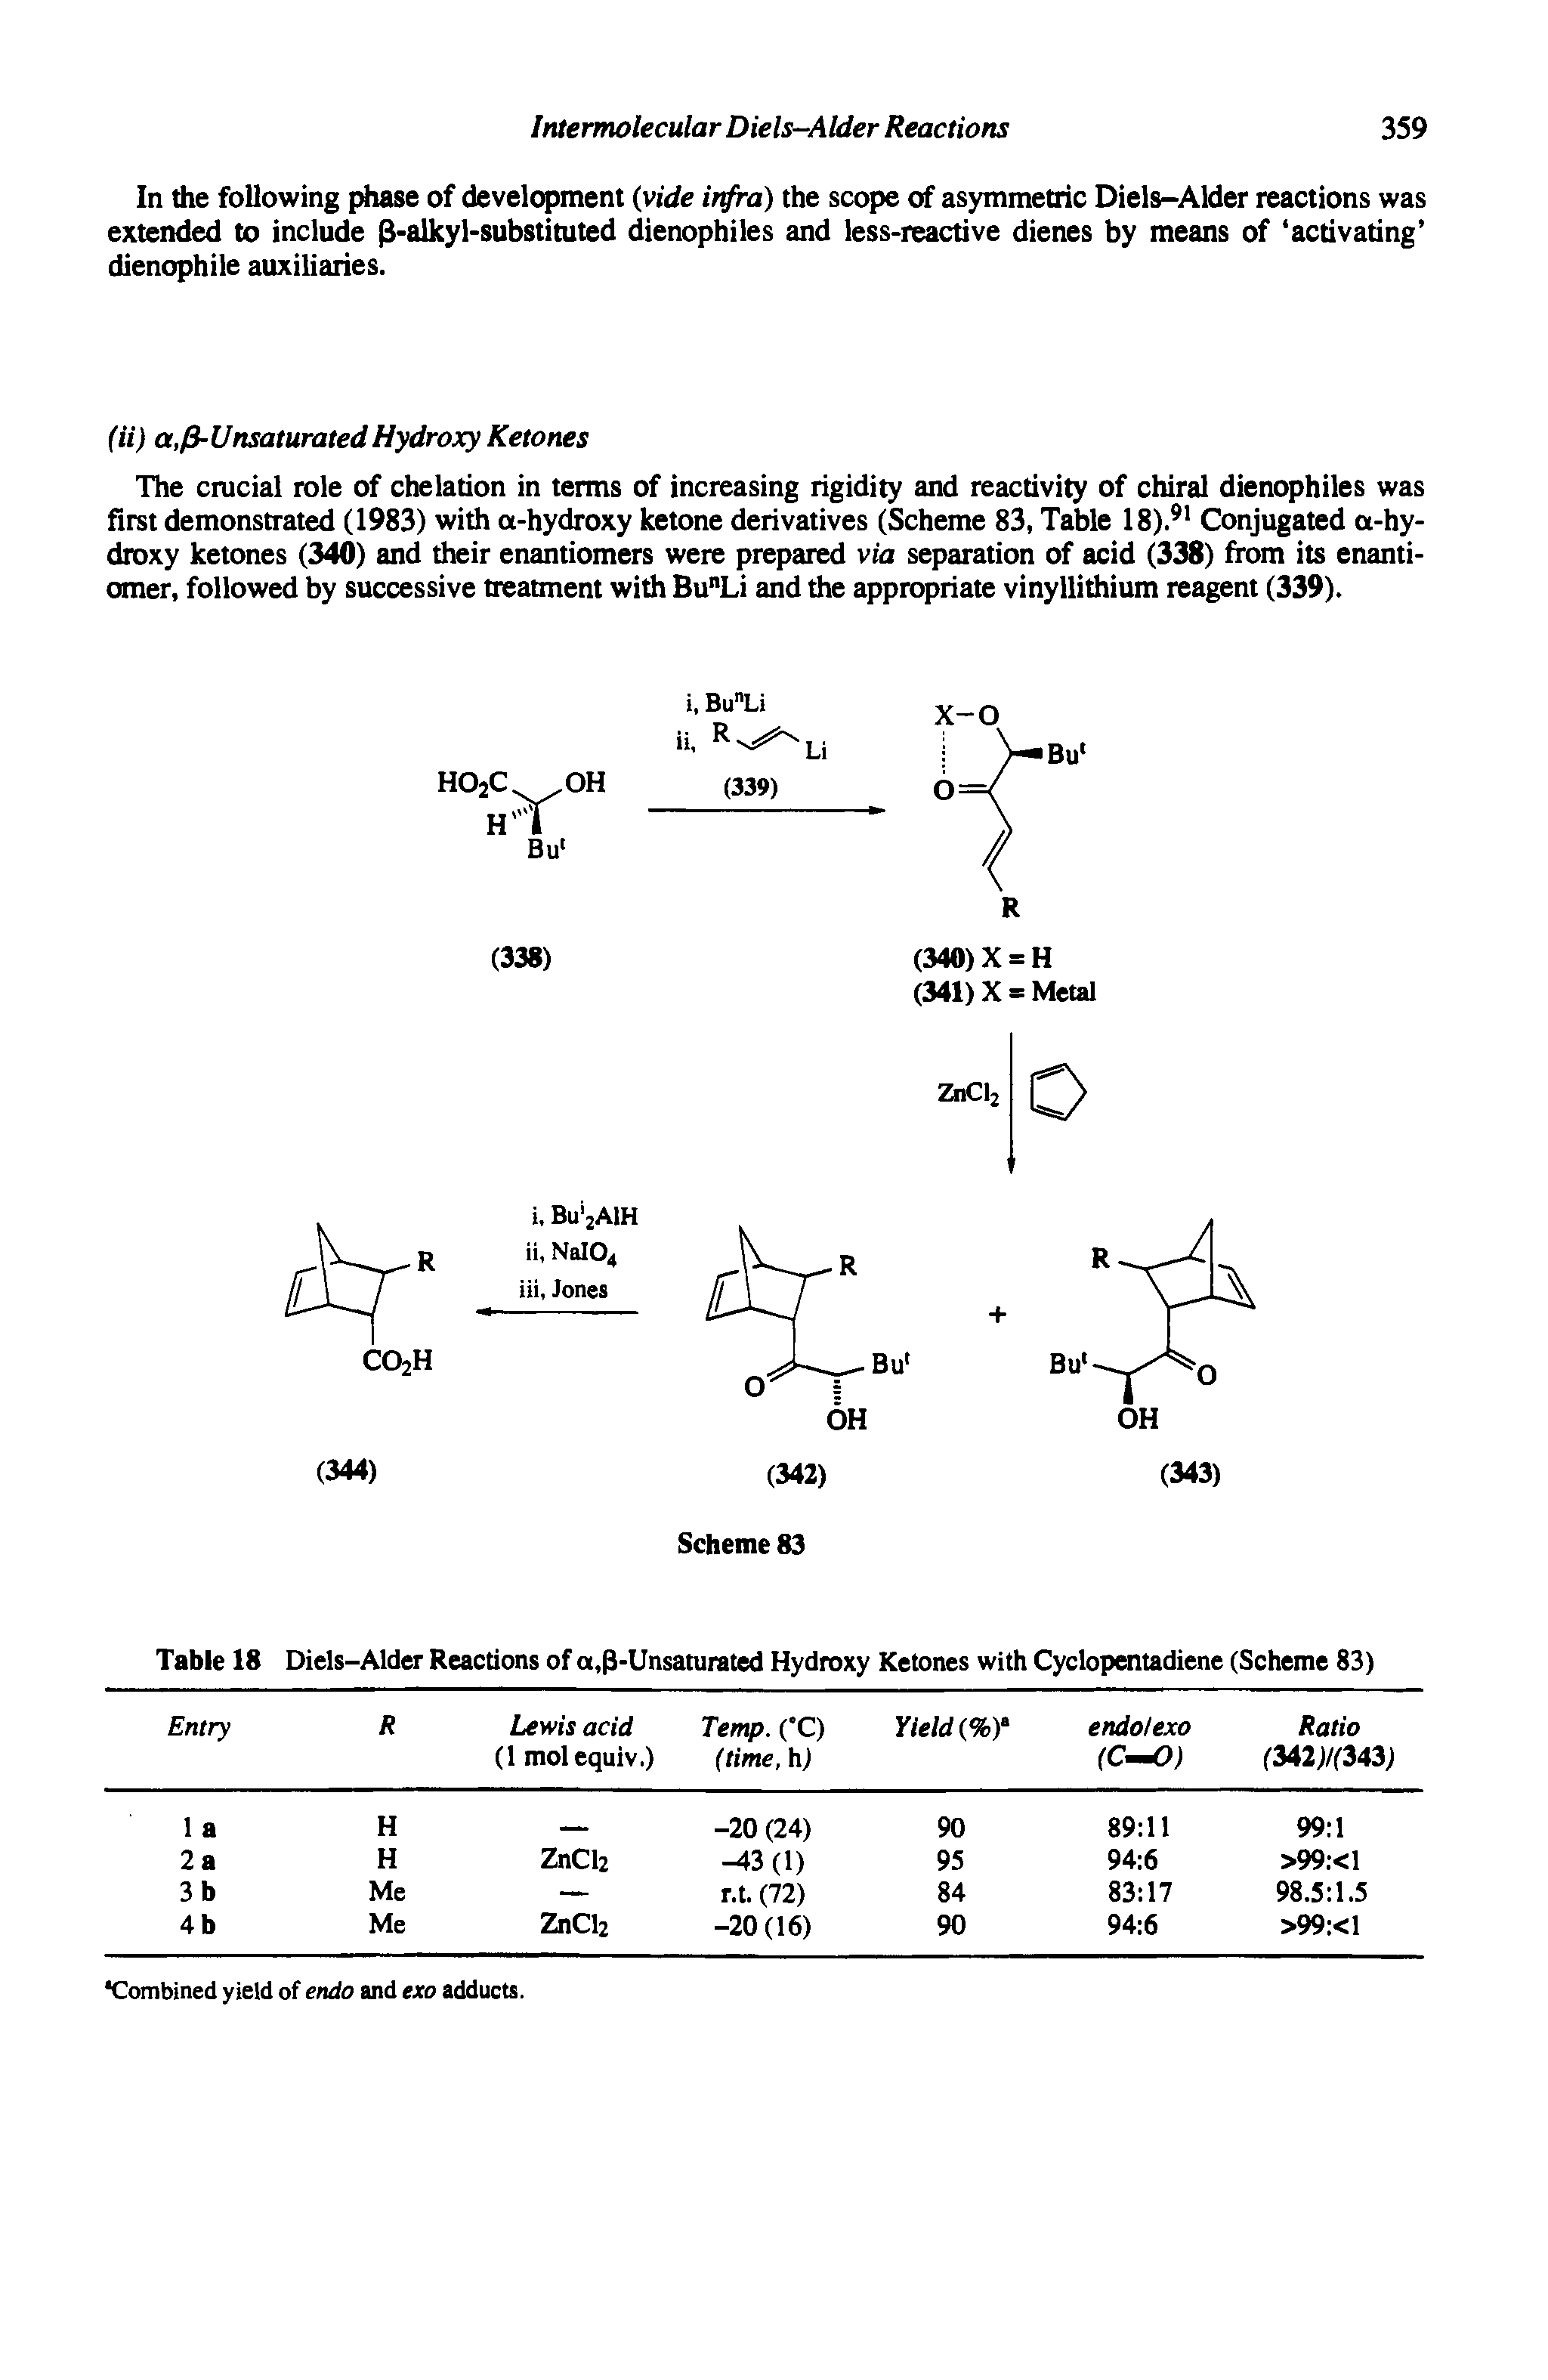 Table 18 Diels-Alder Reactions of a,p-Unsaturated Hydroxy Ketones with Cyclopentadiene (Scheme 83)...